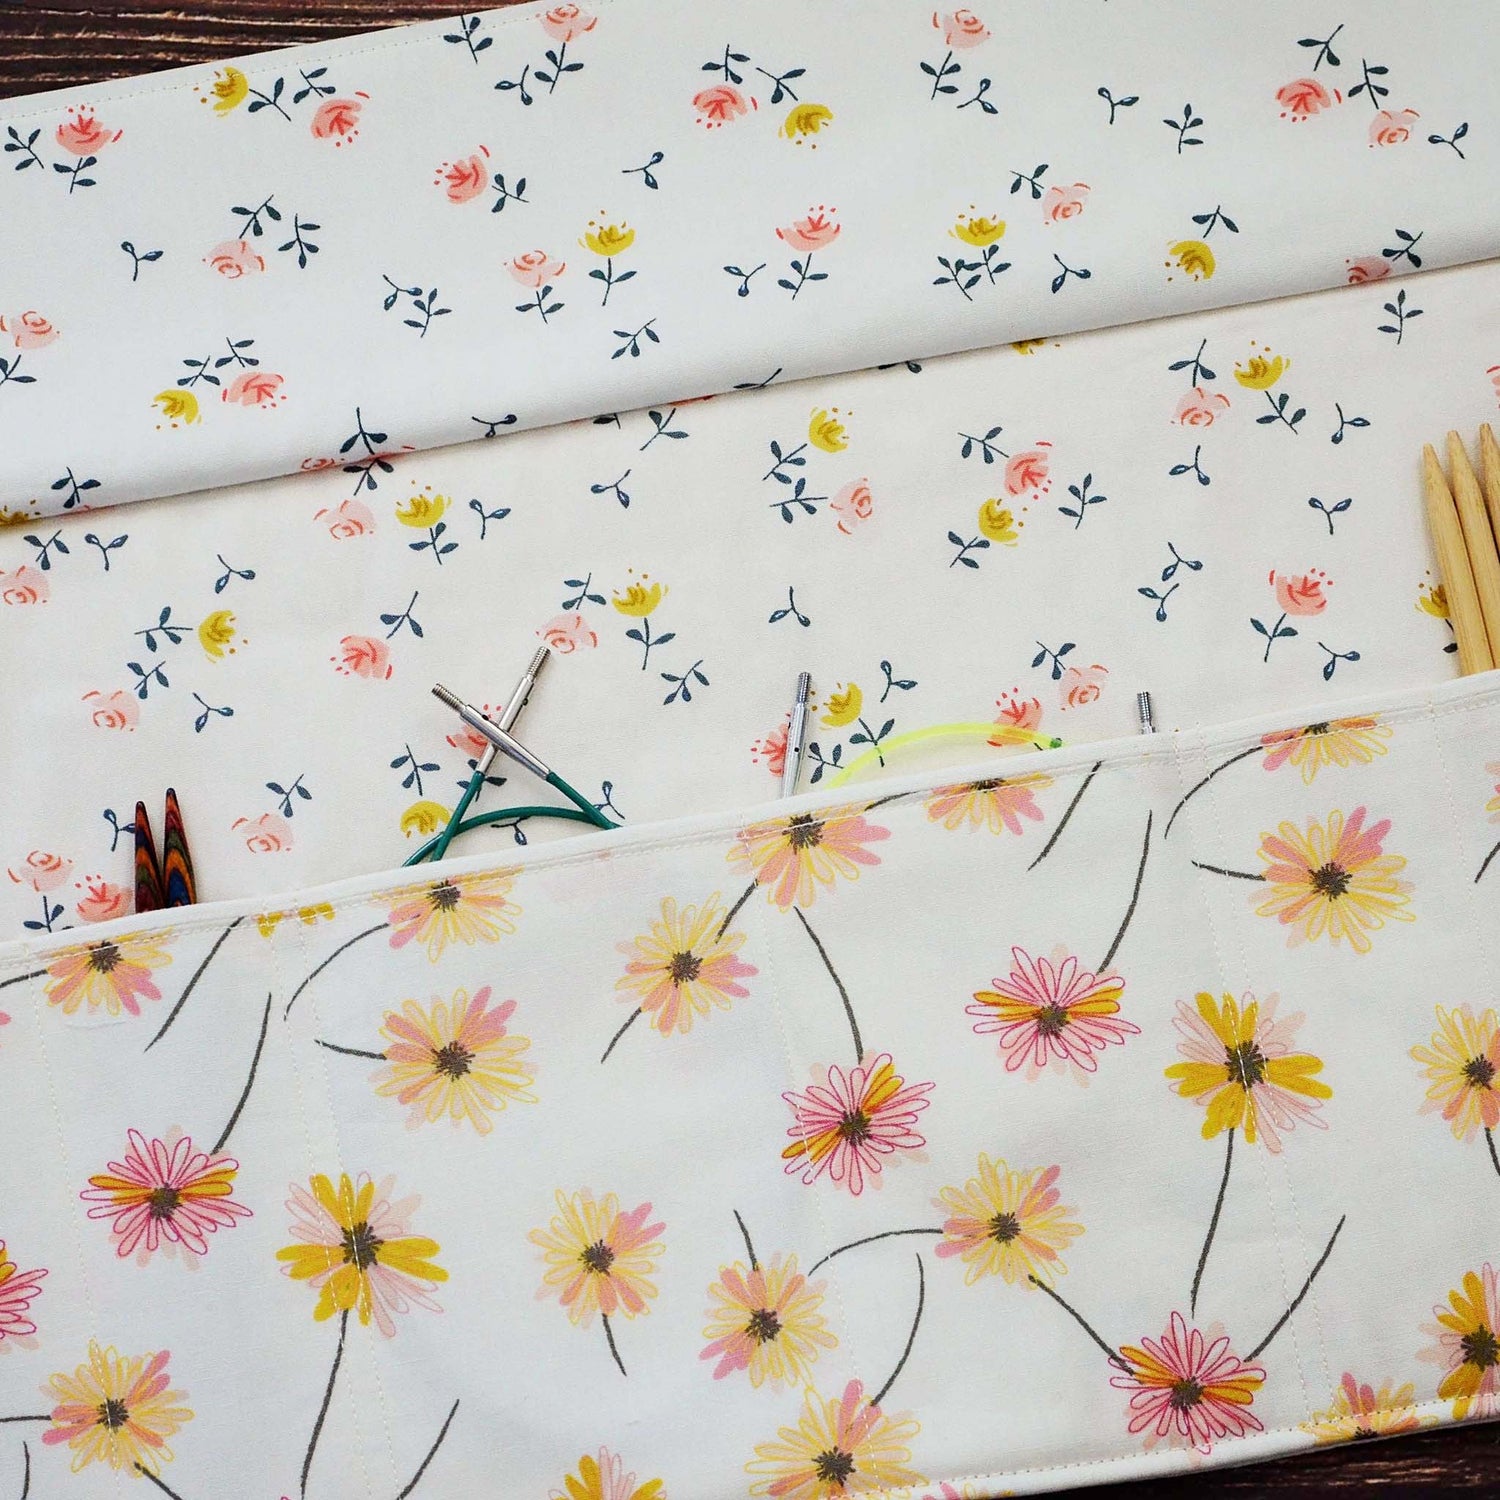 Quilted needle wrap in premium Art Gallery Fabric with a pretty pink and yellow daisy pattern.  Made in Canada by Yellow Petal Handmade.